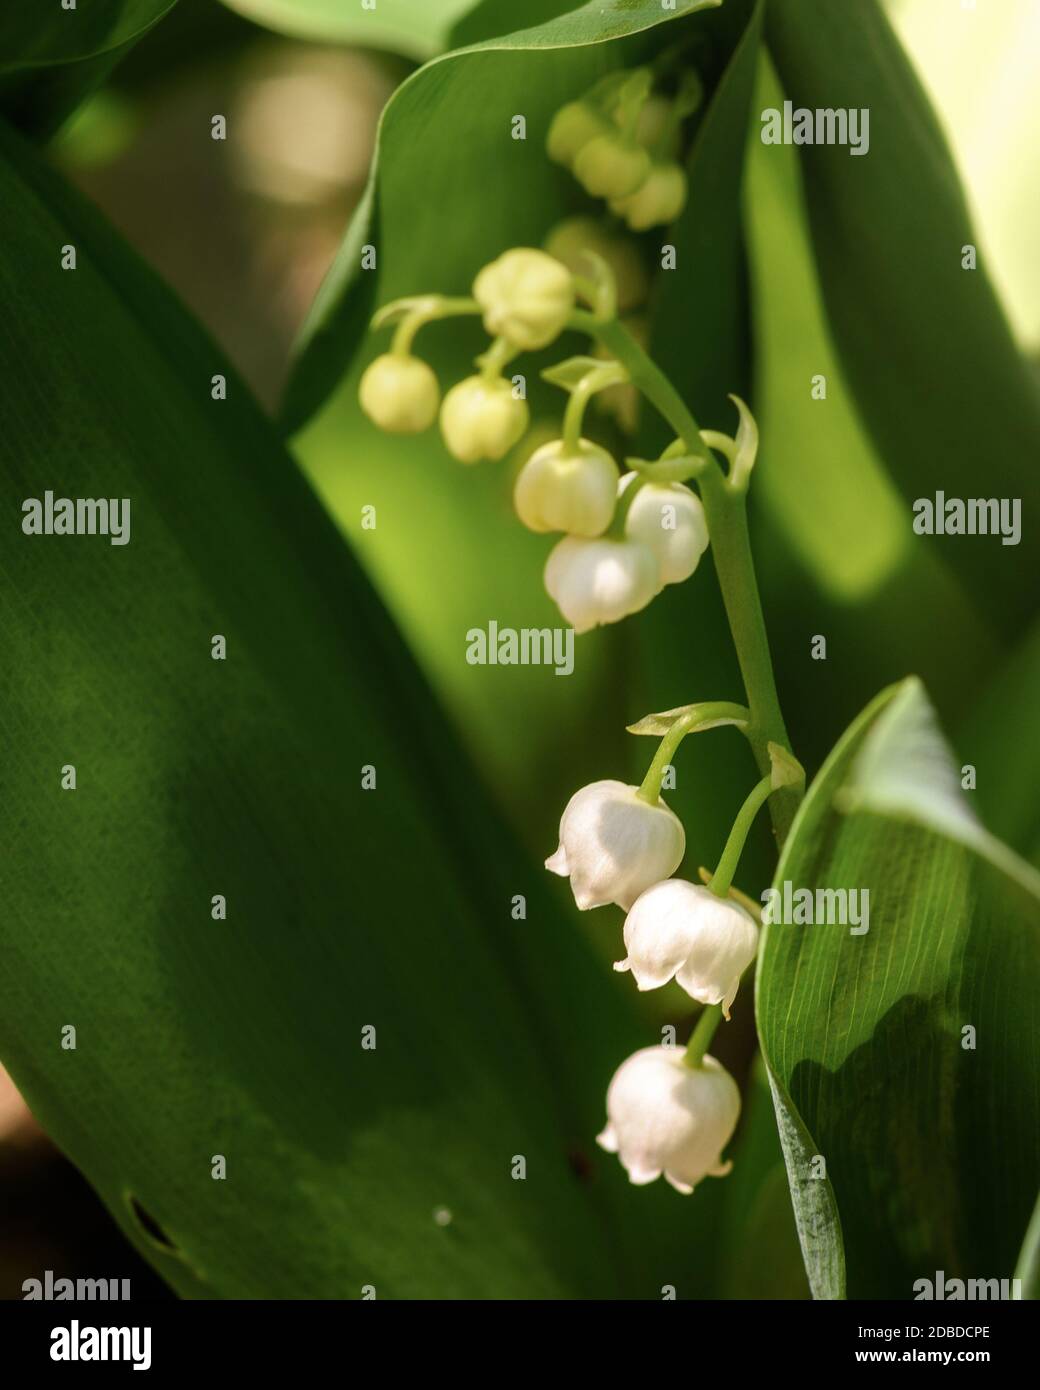 white flowers of the Lily of the valley, illuminated by the sun, among green leaves close-up Stock Photo